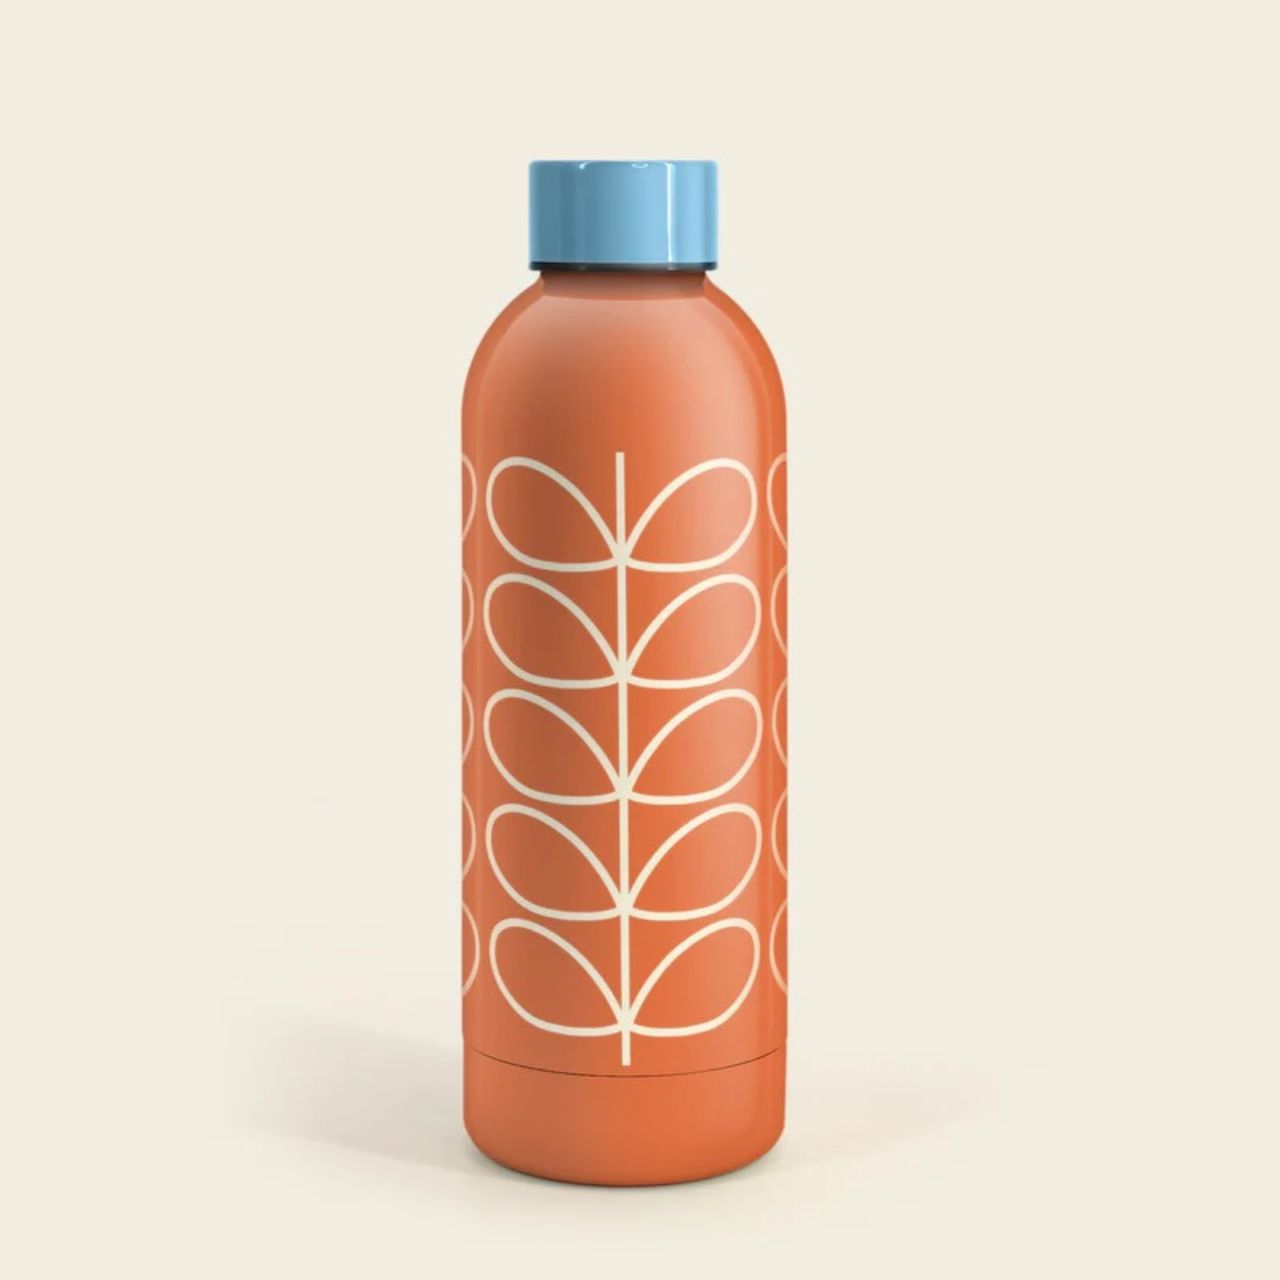 Orla Kiely Orange Linear Stem Stainless Steel Water Bottle  Bring a burst of colour to your home with this water bottle from Orla Kiely.  From one the world's top fashion designers Orla Kiely comes this stainless steel water bottle with one of Orla's iconic patterns "The Linear Stem Orange" pattern.